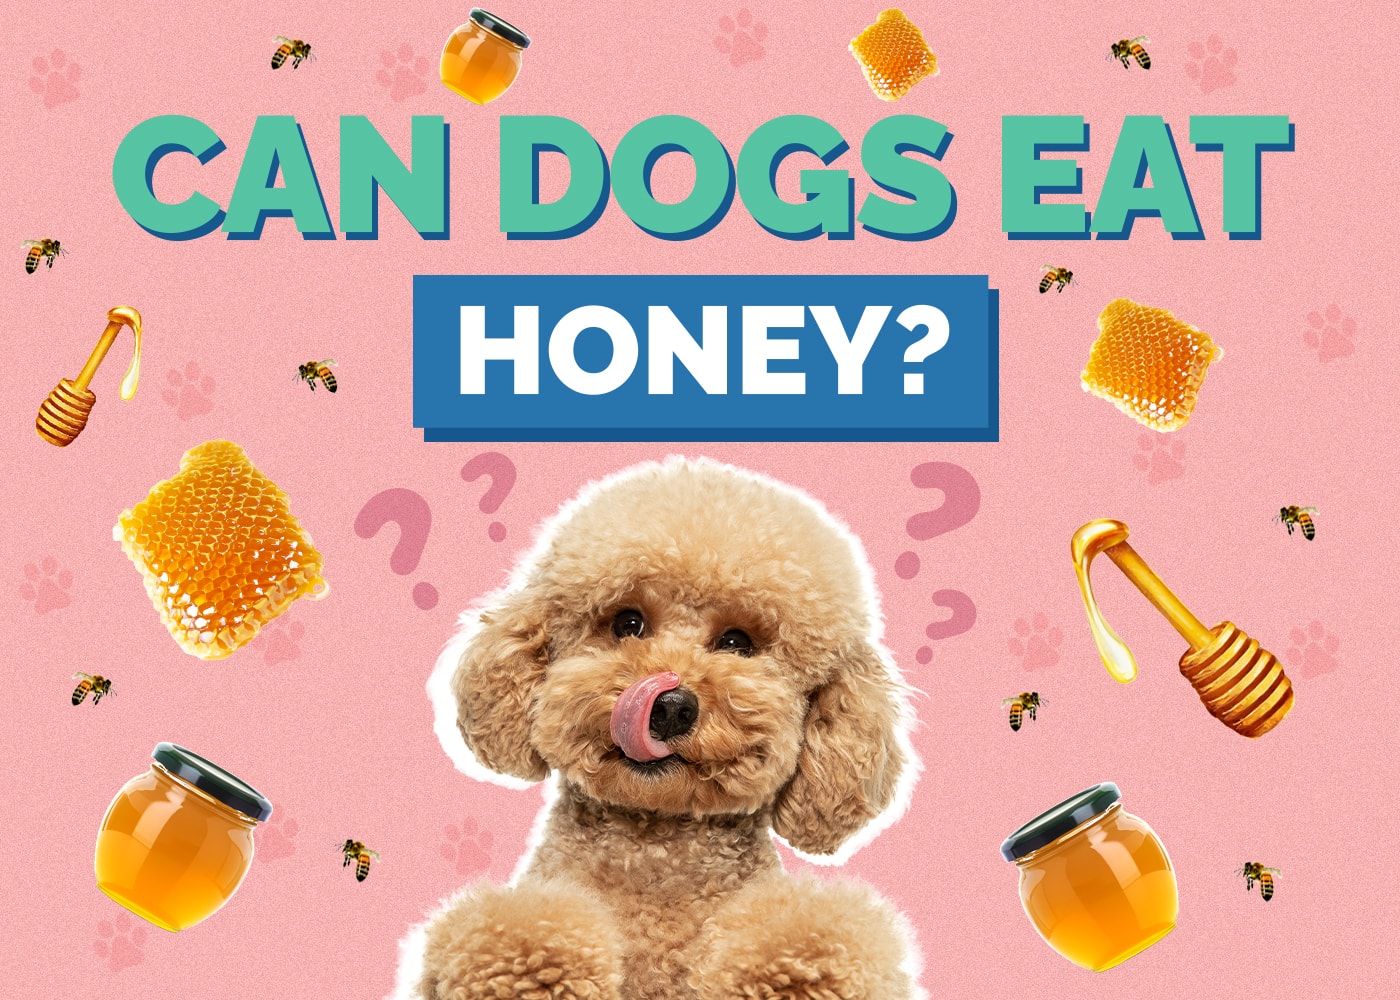 Can Dogs Eat honey